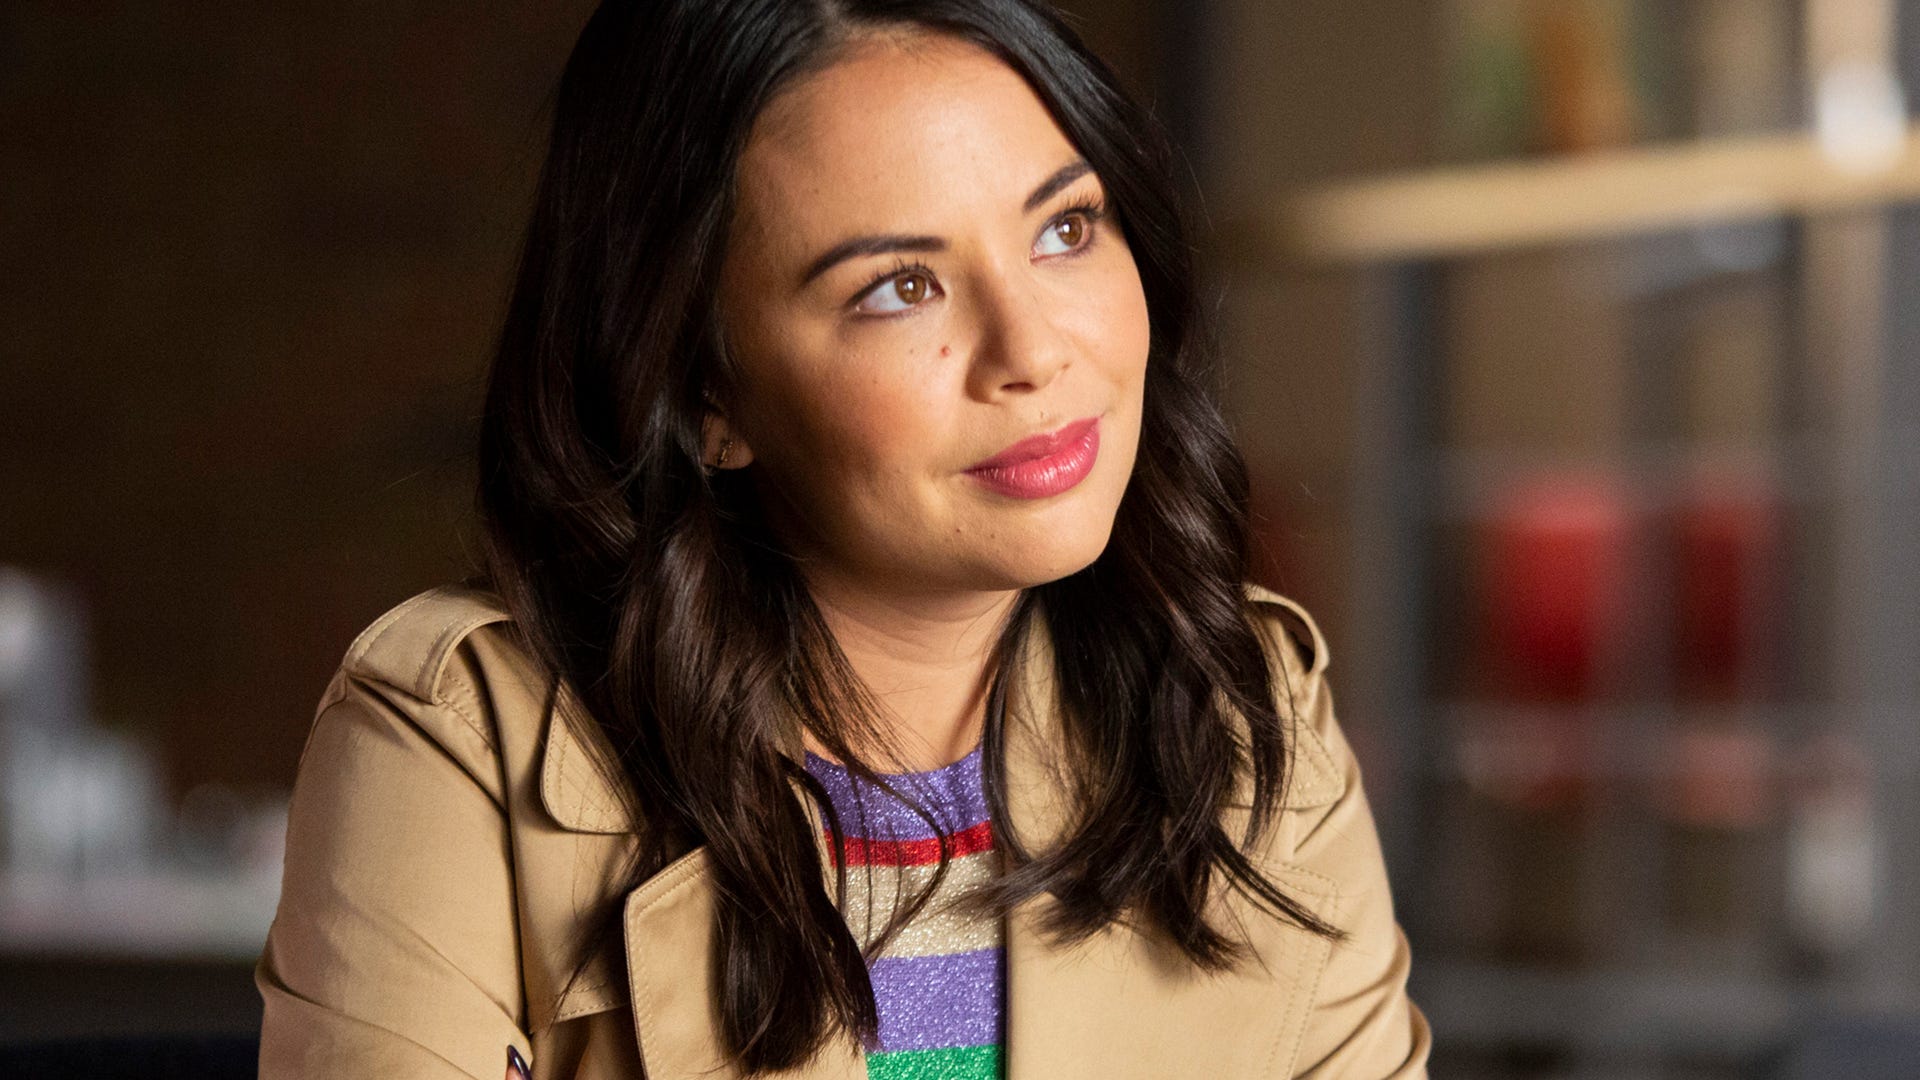 Janel Parrish, Pretty Little Liars: The Perfectionists​